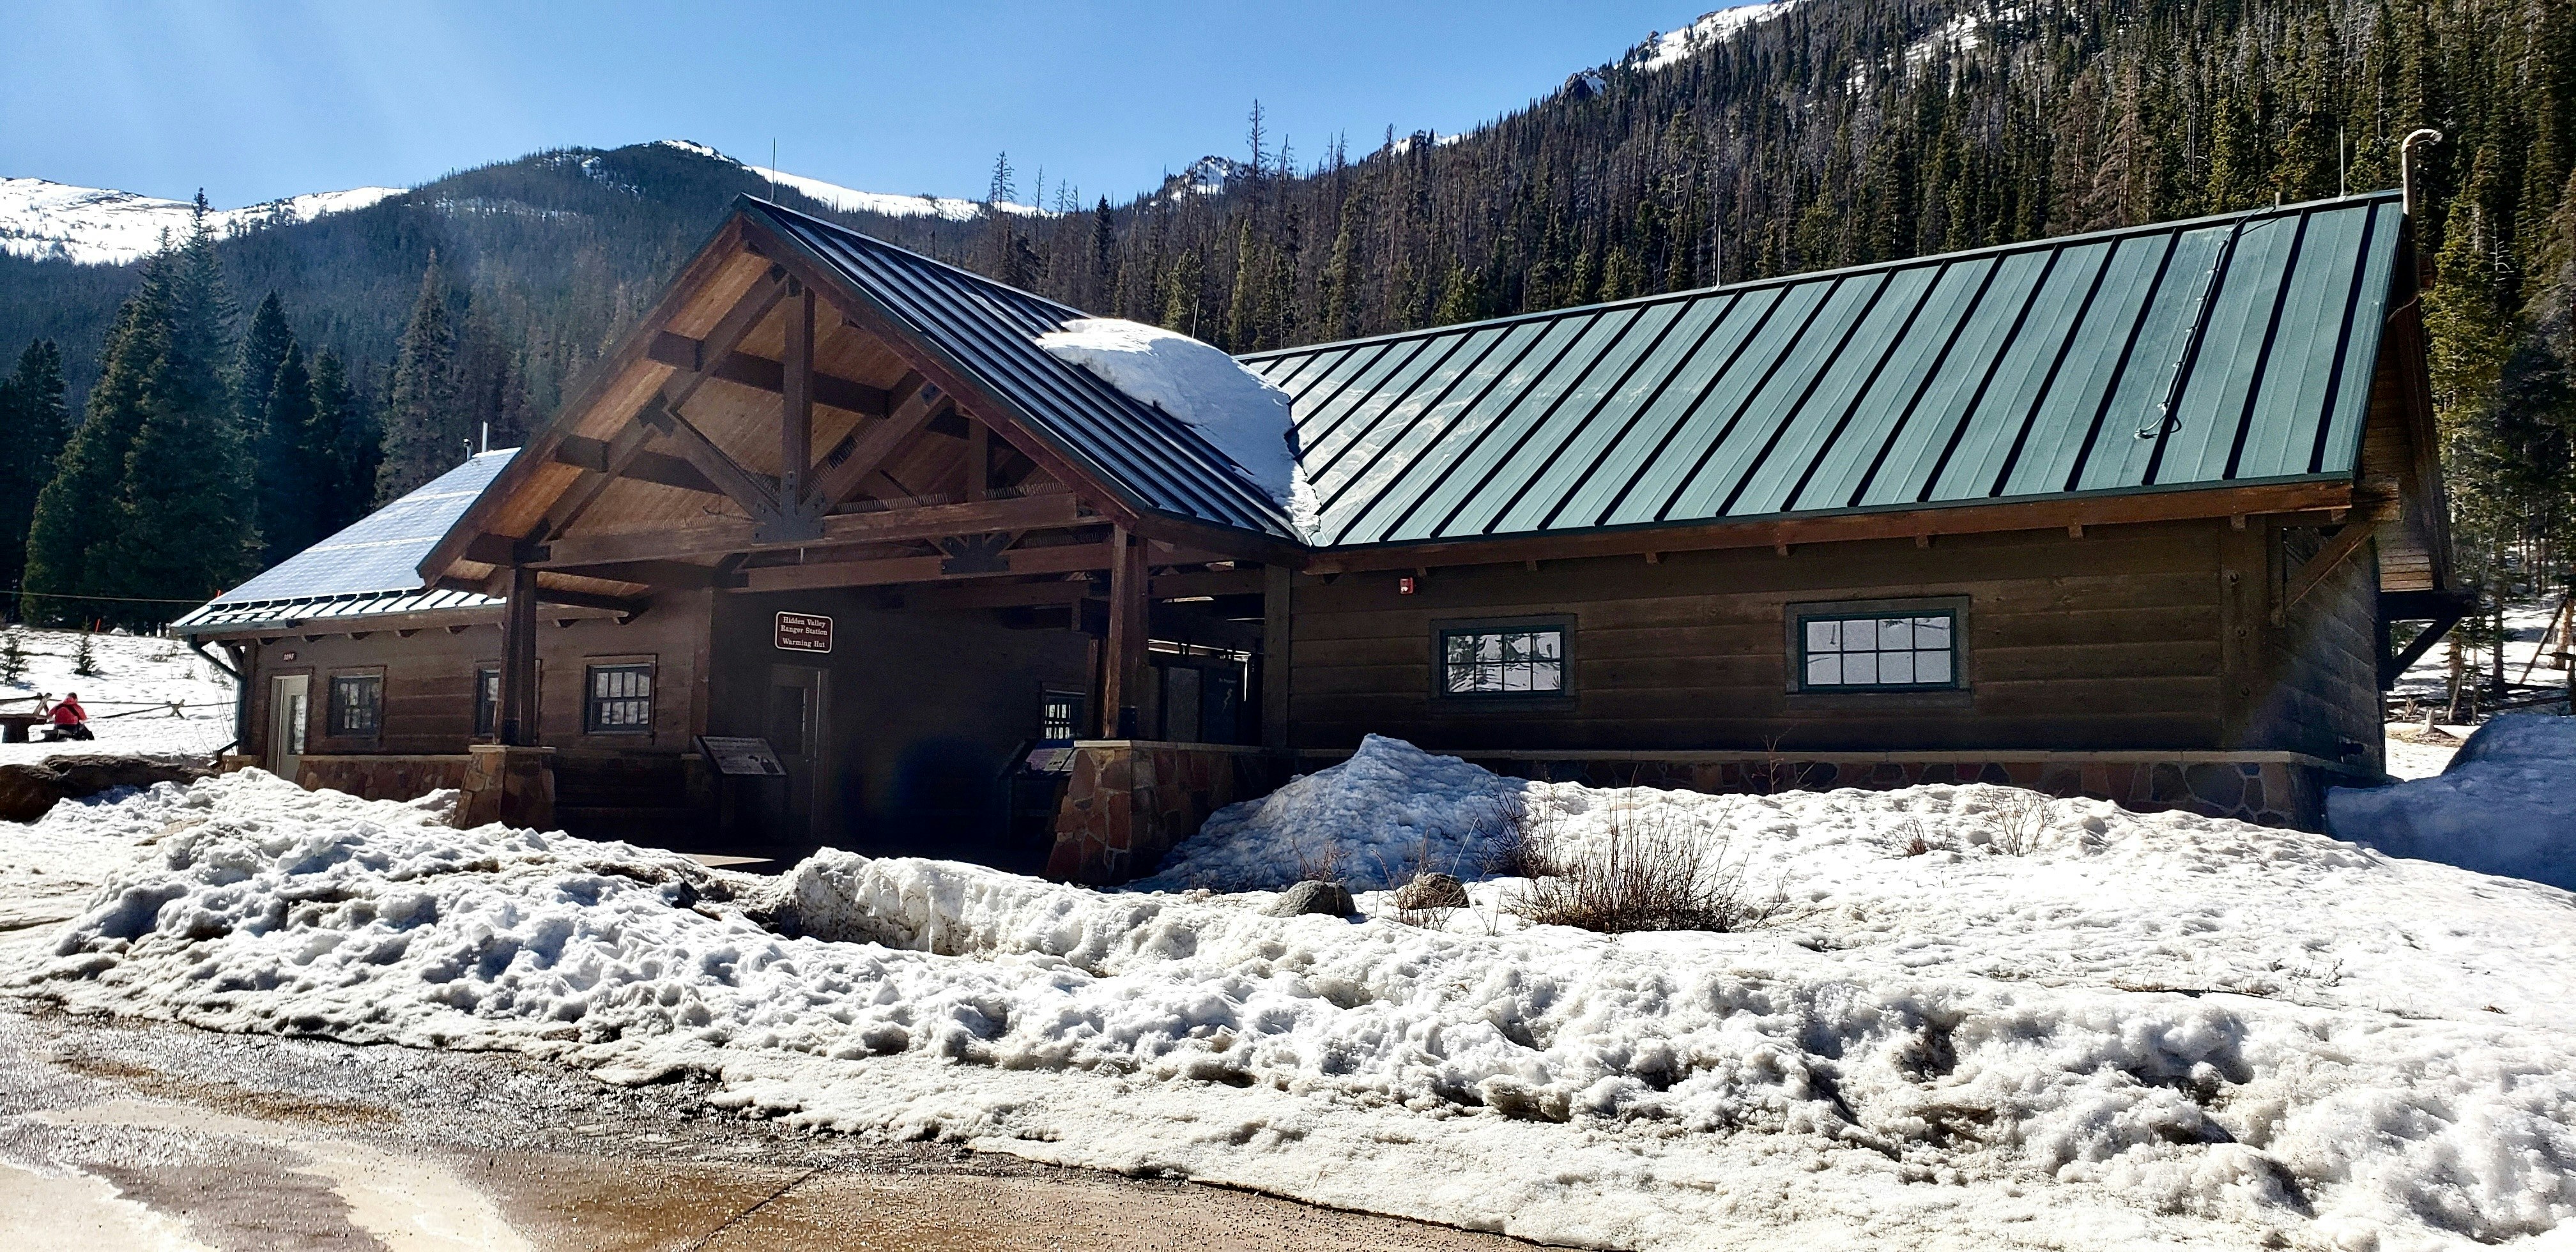 The former ski lodge at Hidden Valley is now an interpretive center